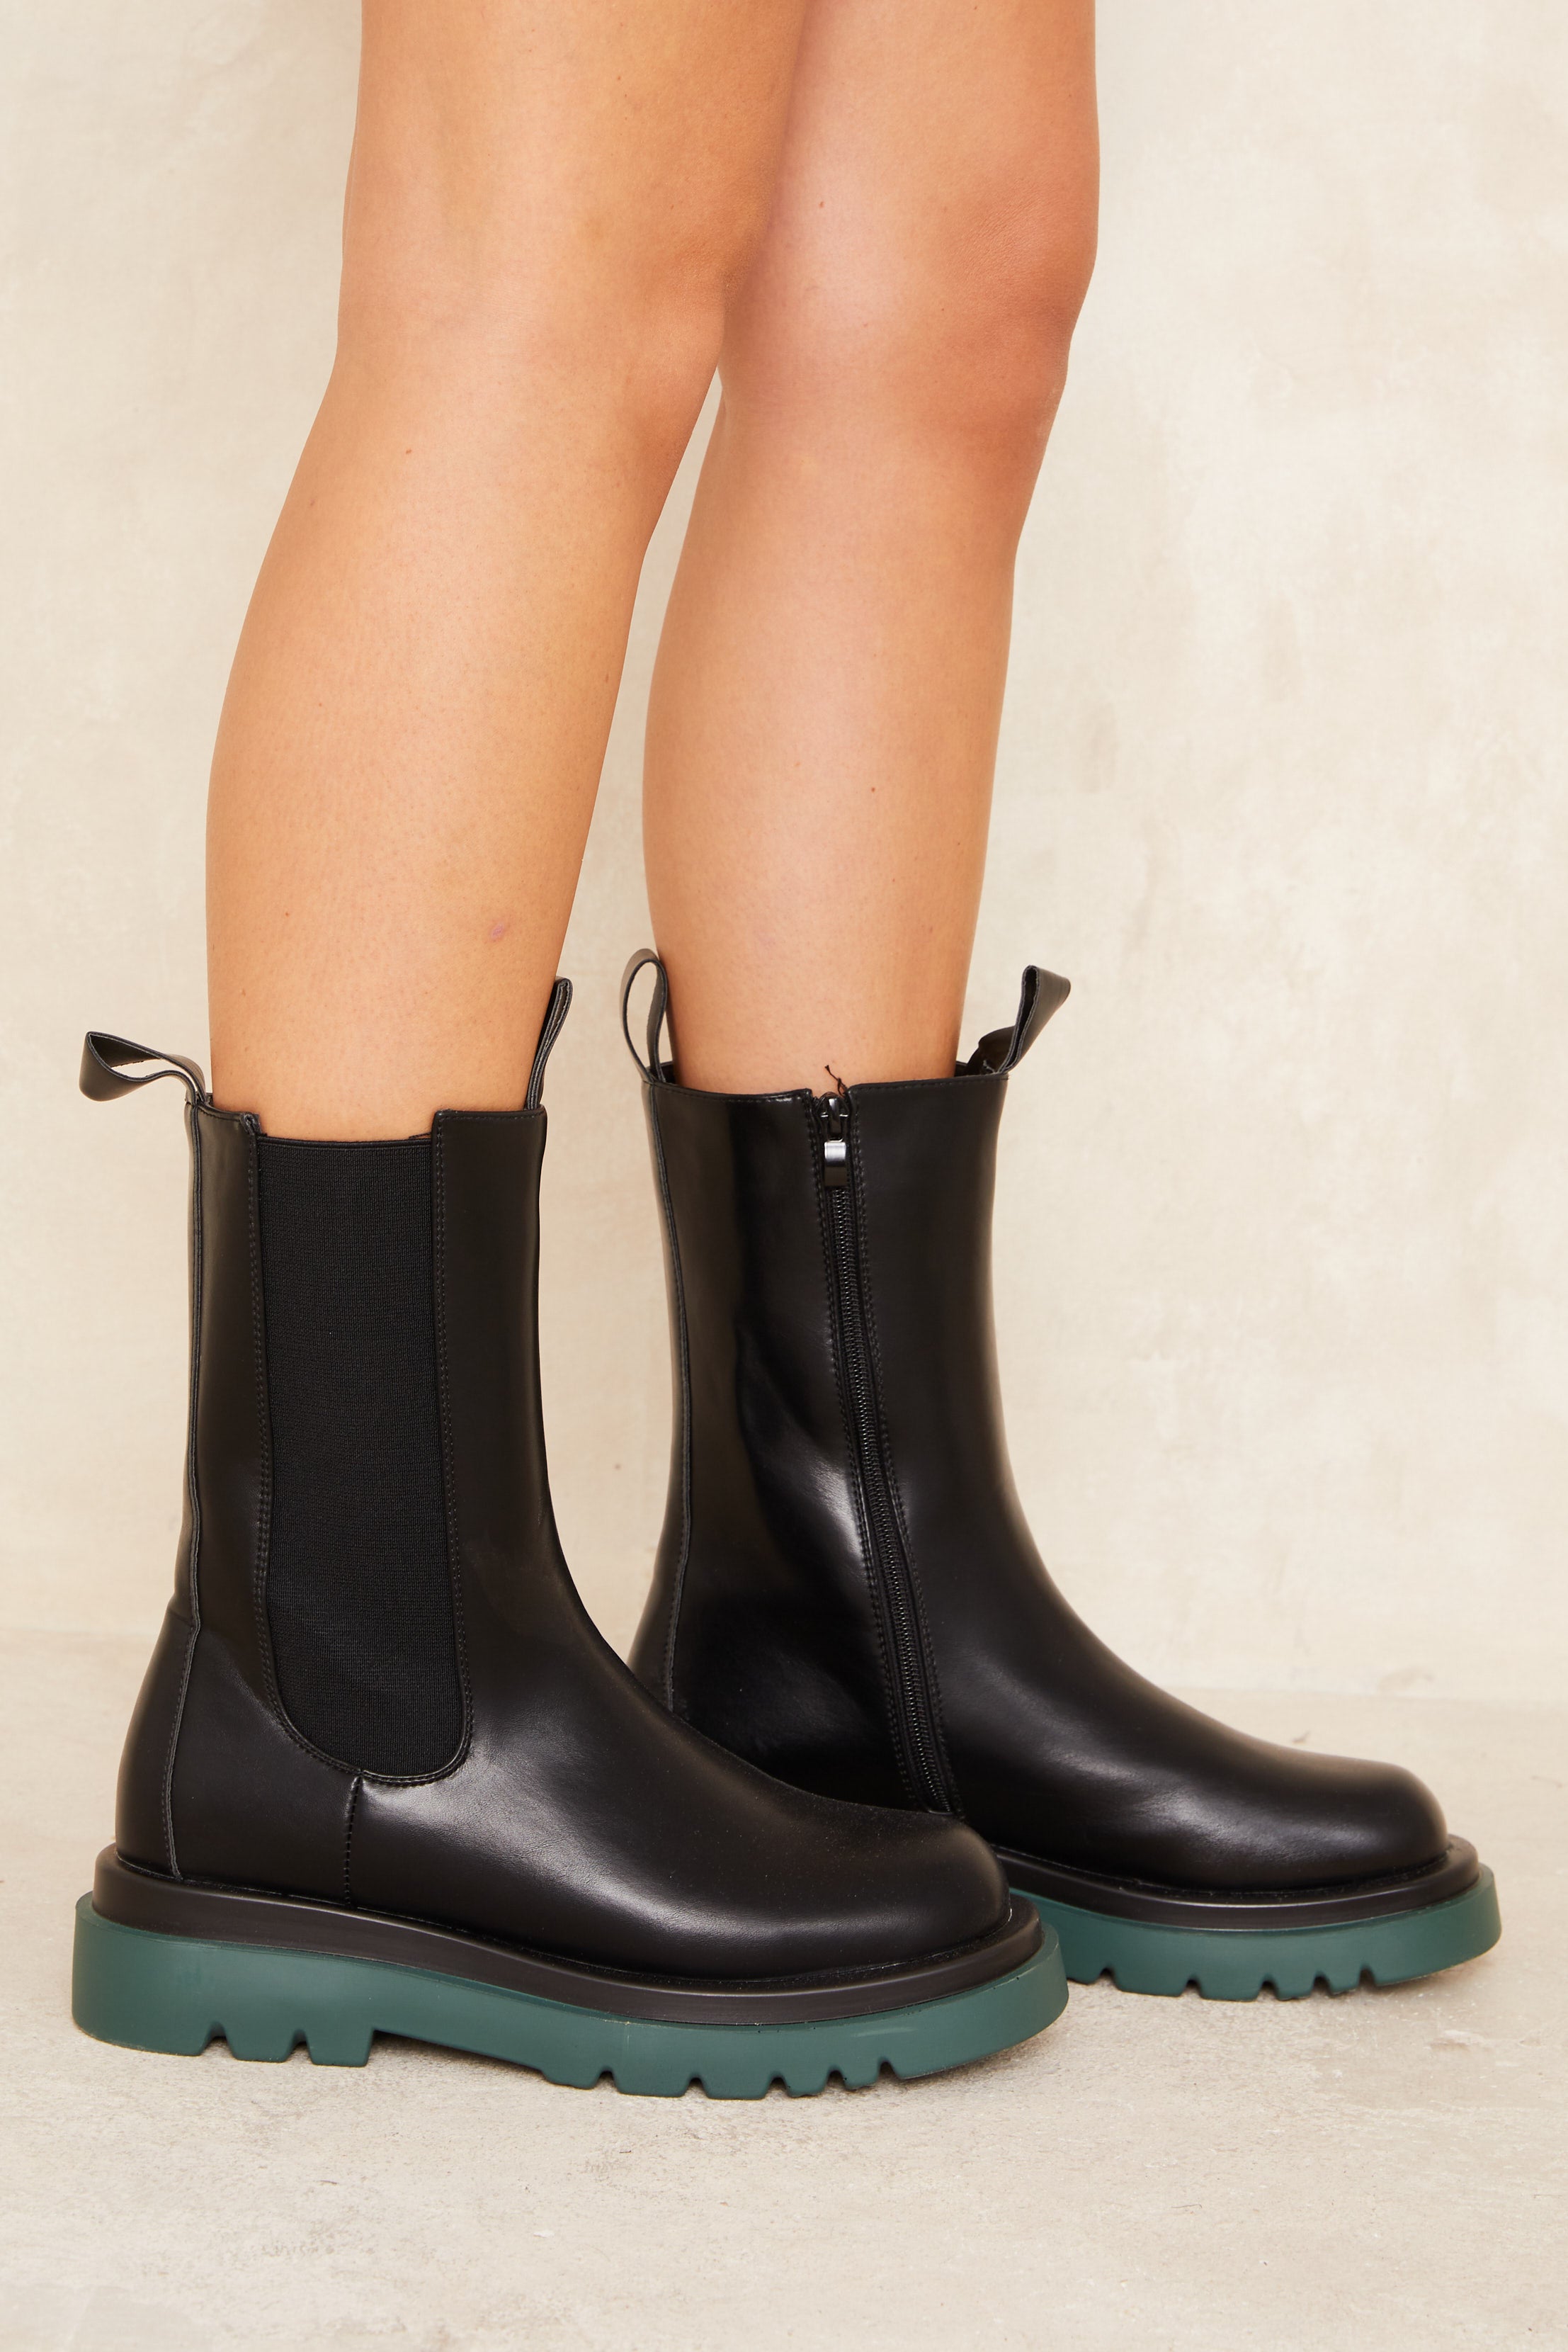 LEXIA Chunky Green Leather Boots